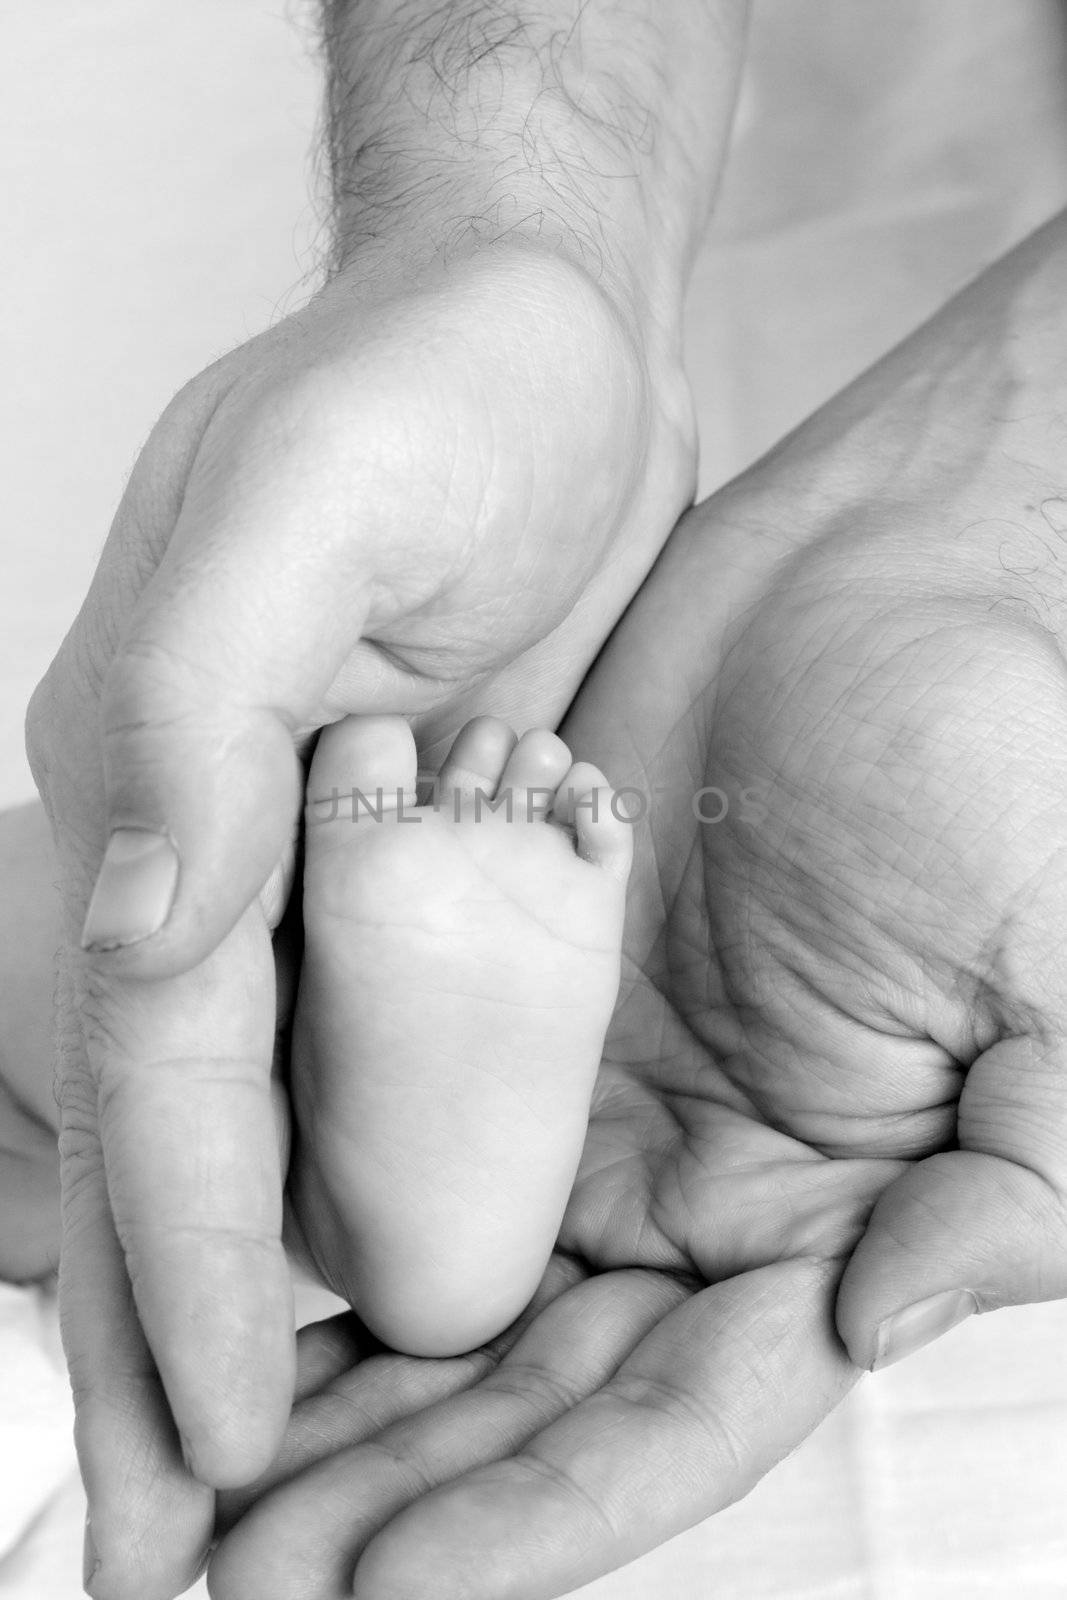 feet of the baby by anelina